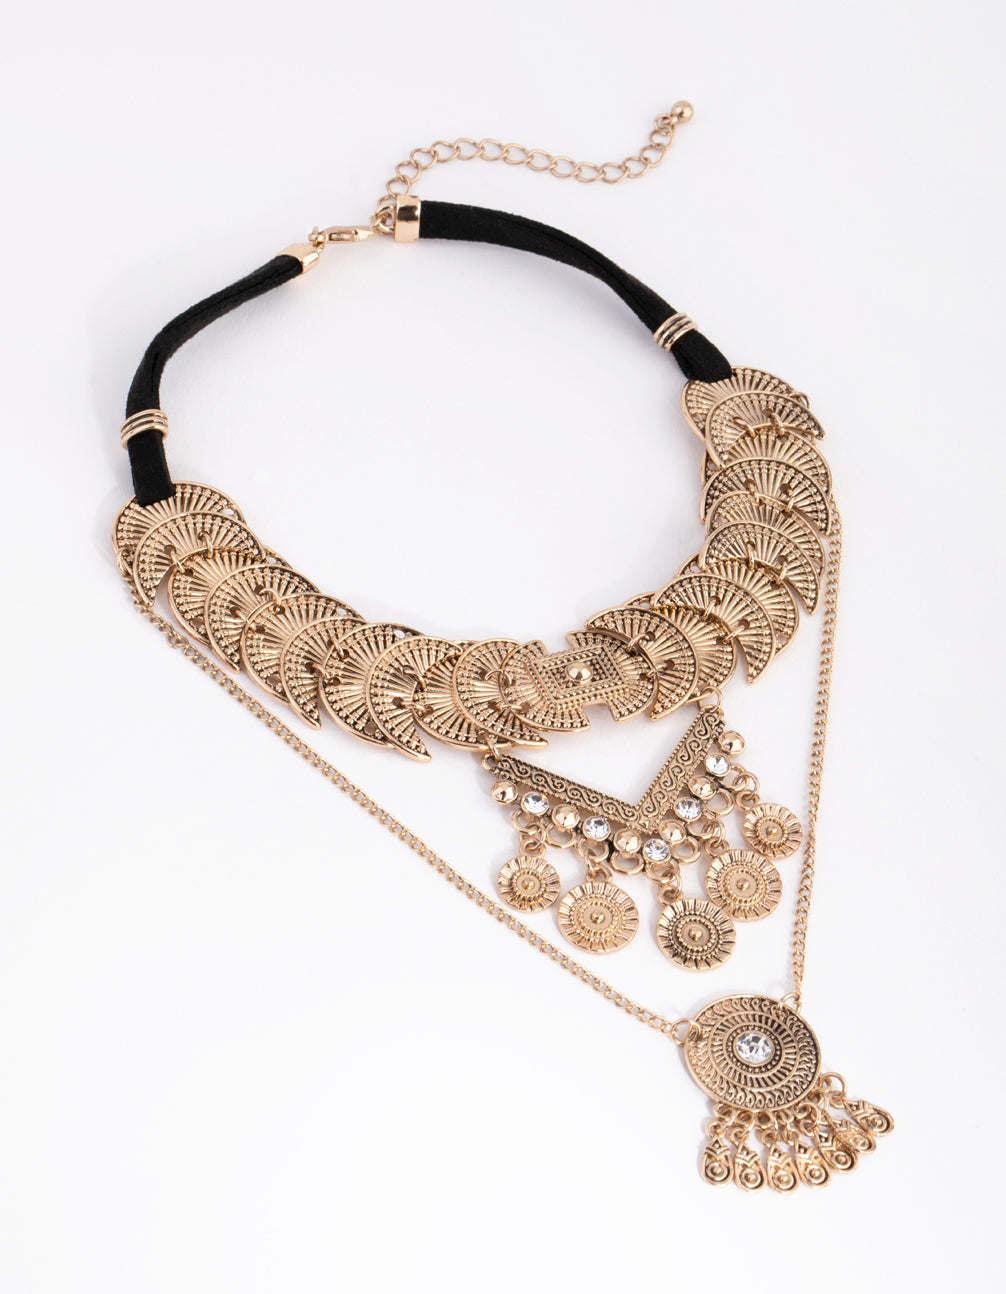 Antique Gold Chunky Statement Round Textured Discs with Teardrop Dangles Bib Necklace for Women